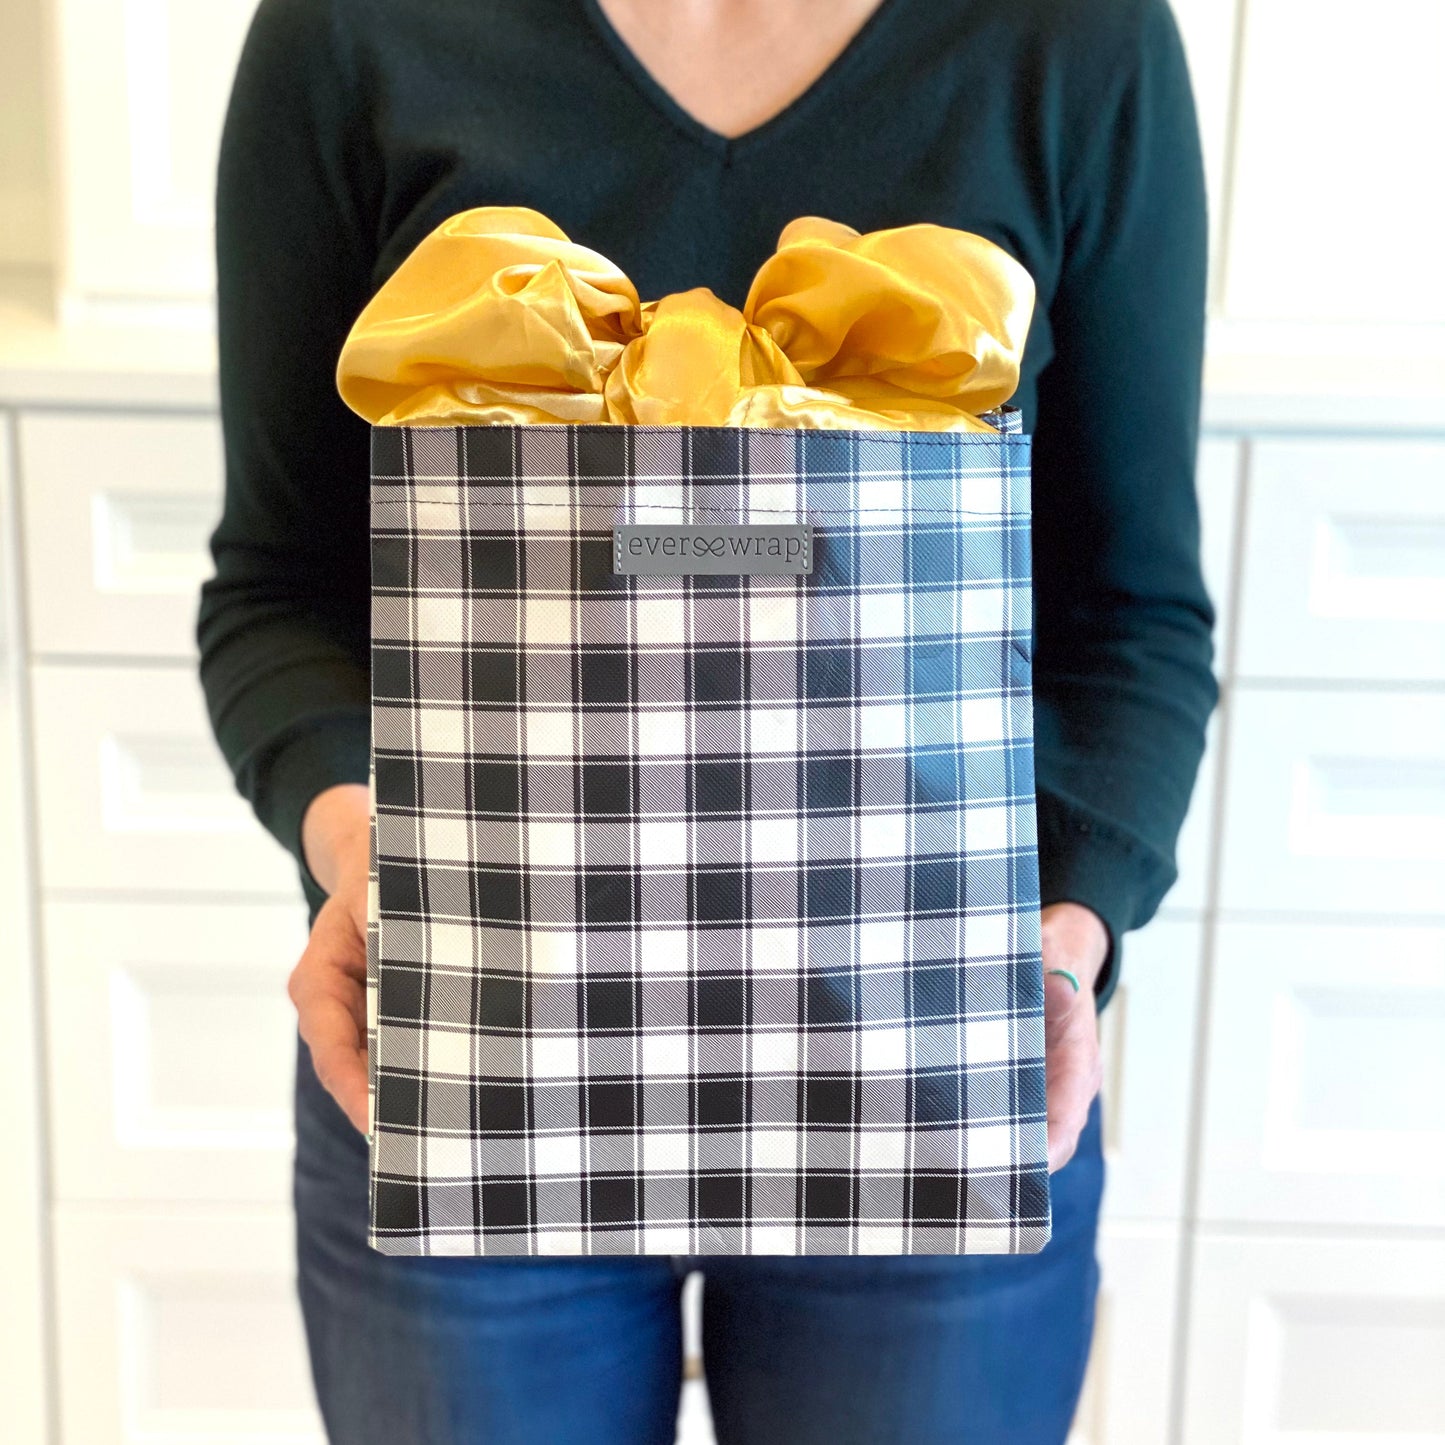 WHOLESALE QTY 15 Black and White Buffalo Check with Gold Satin Bow, fold, store, and reseal with our reusable gift bag, satin closure makes for an eco-friendly gift bag